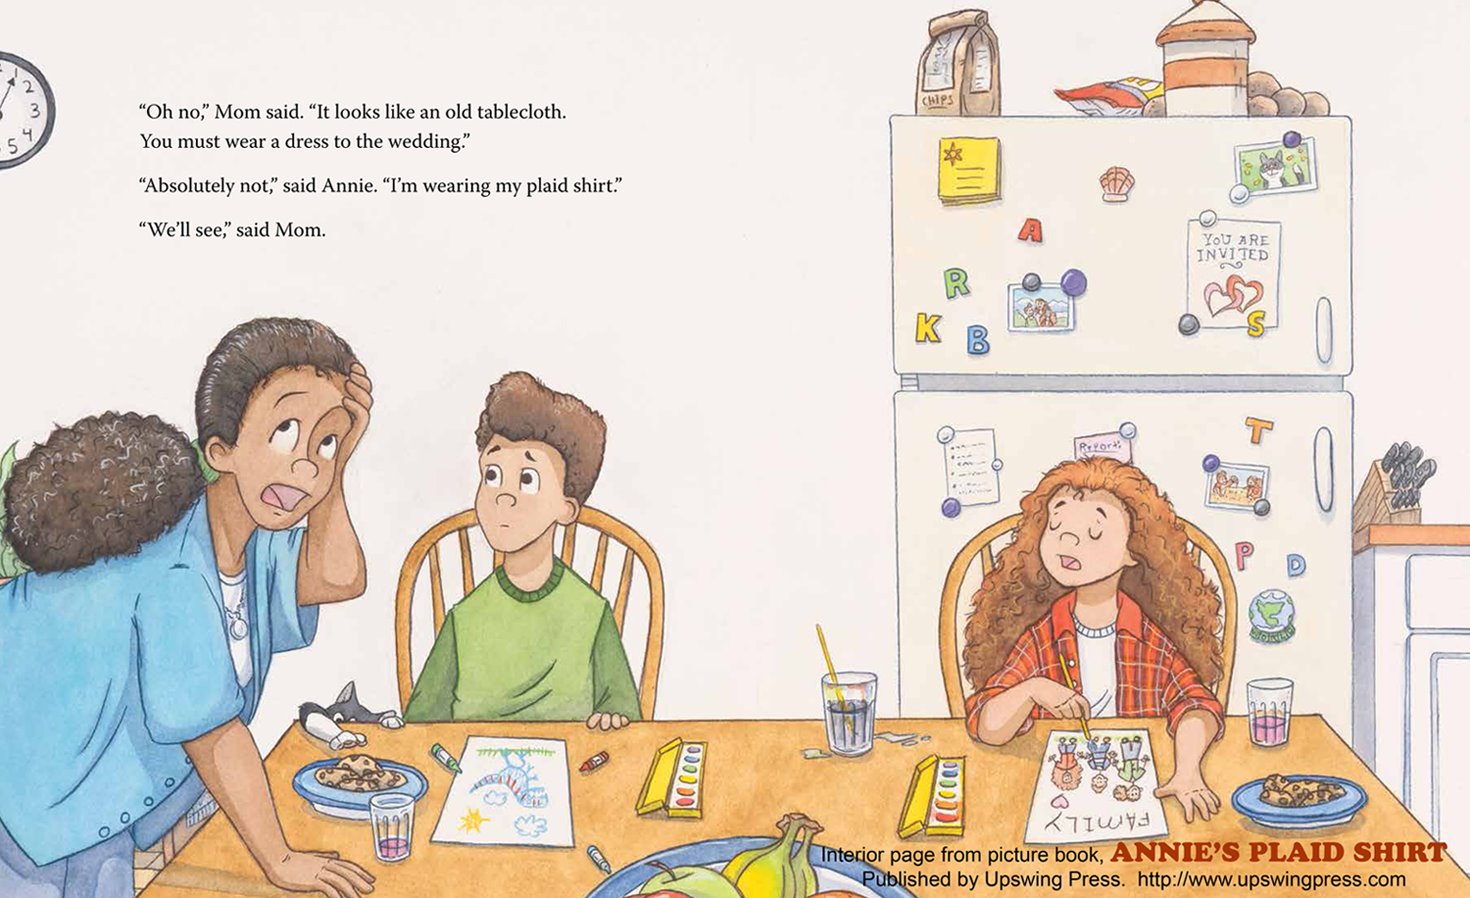 ANNIE'S PLAID SHIRT socially significant picture book